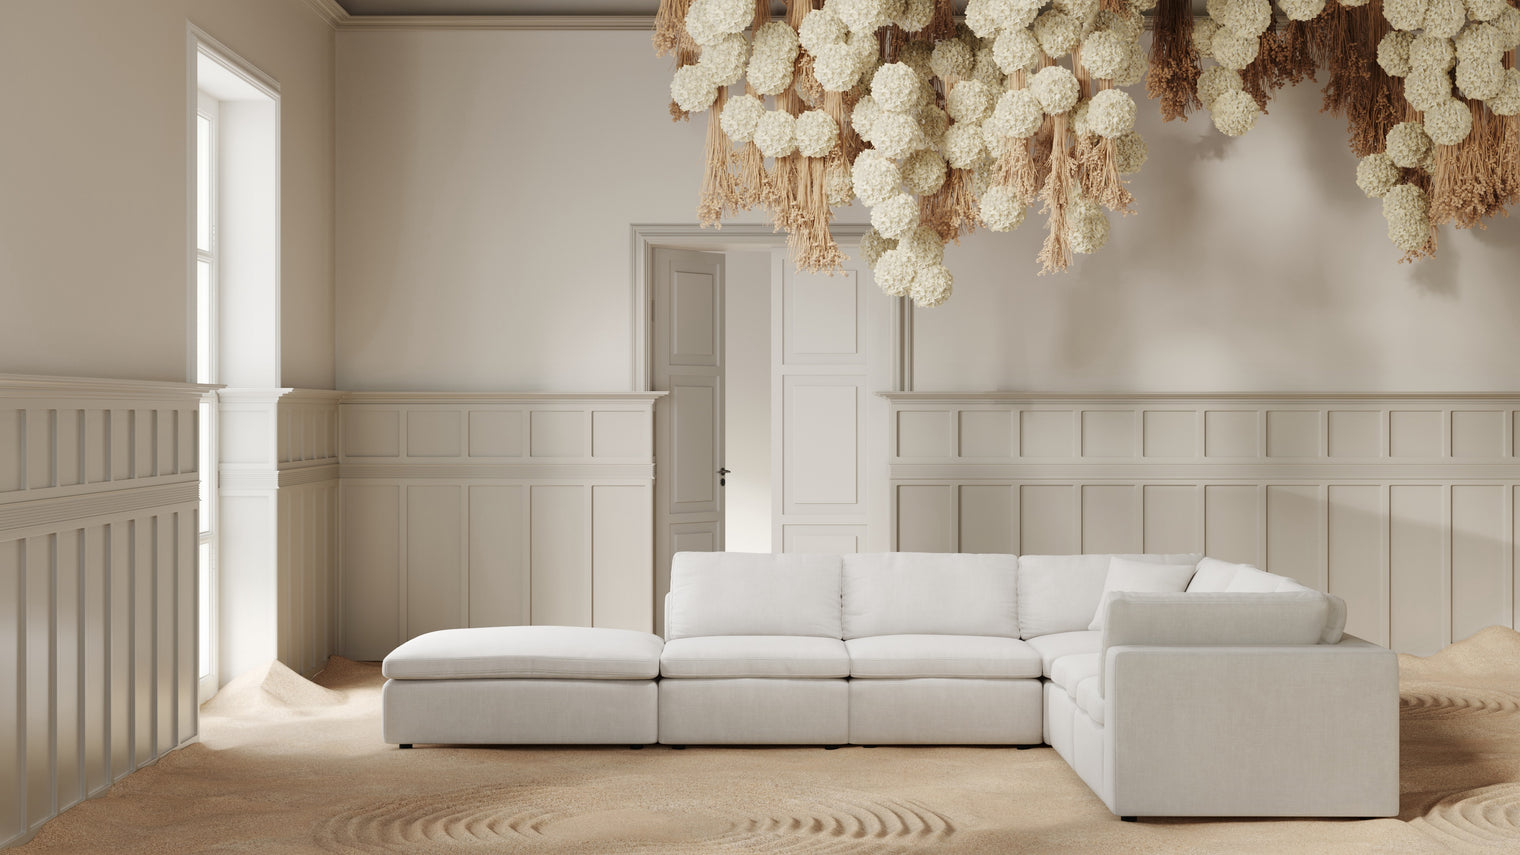 TAILORED AESTHETIC | Whether your style leans towards contemporary, traditional, or eclectic, the Sky Sofa effortlessly adapts to design preferences. Its neutral color palette serves as a canvas for creativity, allowing for accessorizing with bold accent pillows, throws, or statement coffee tables to make it truly unique.
